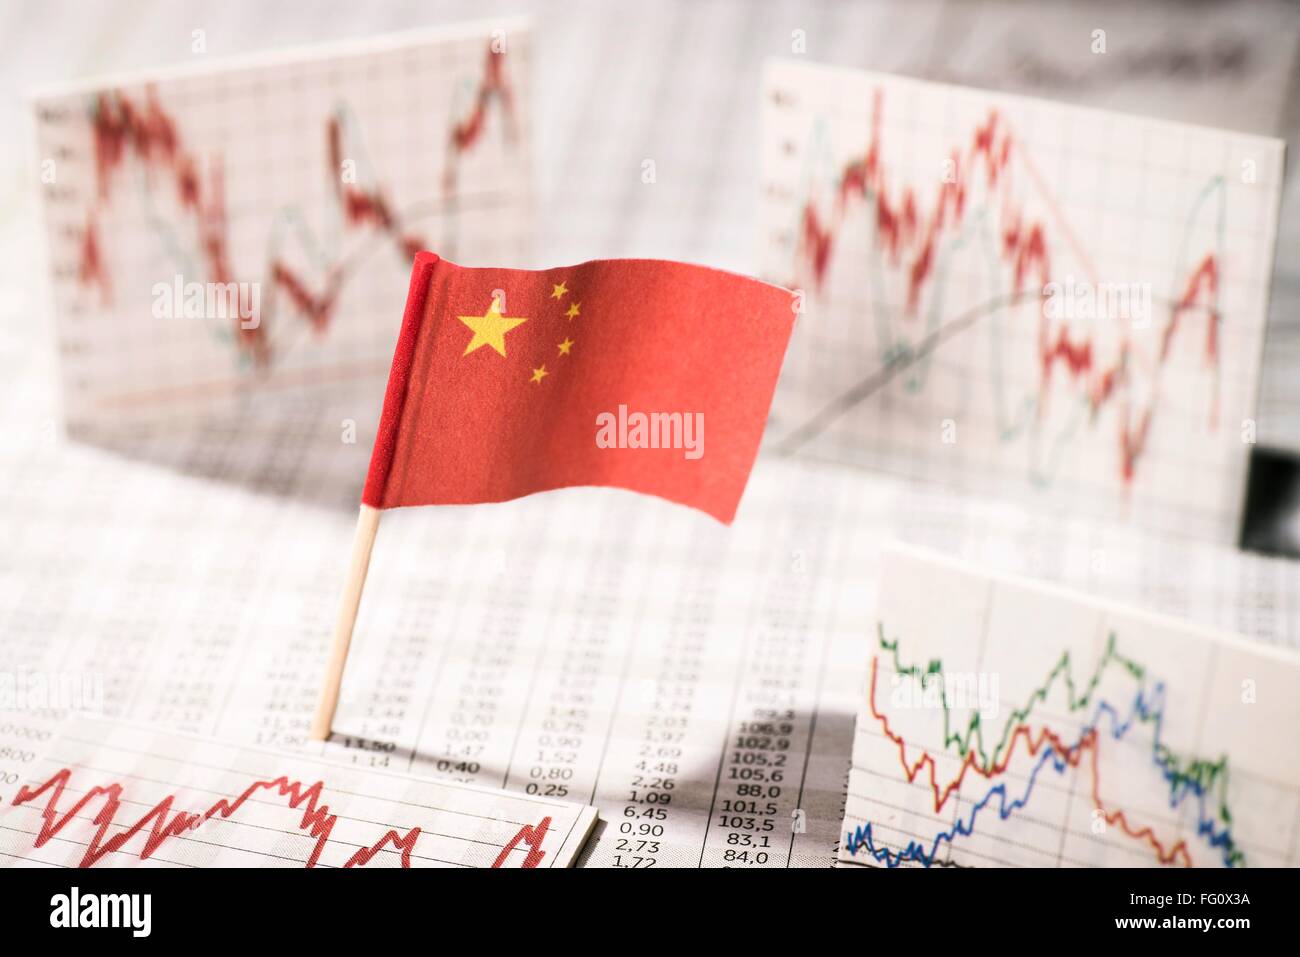 Chinese flag with rate tables and graphs for economic development. Stock Photo